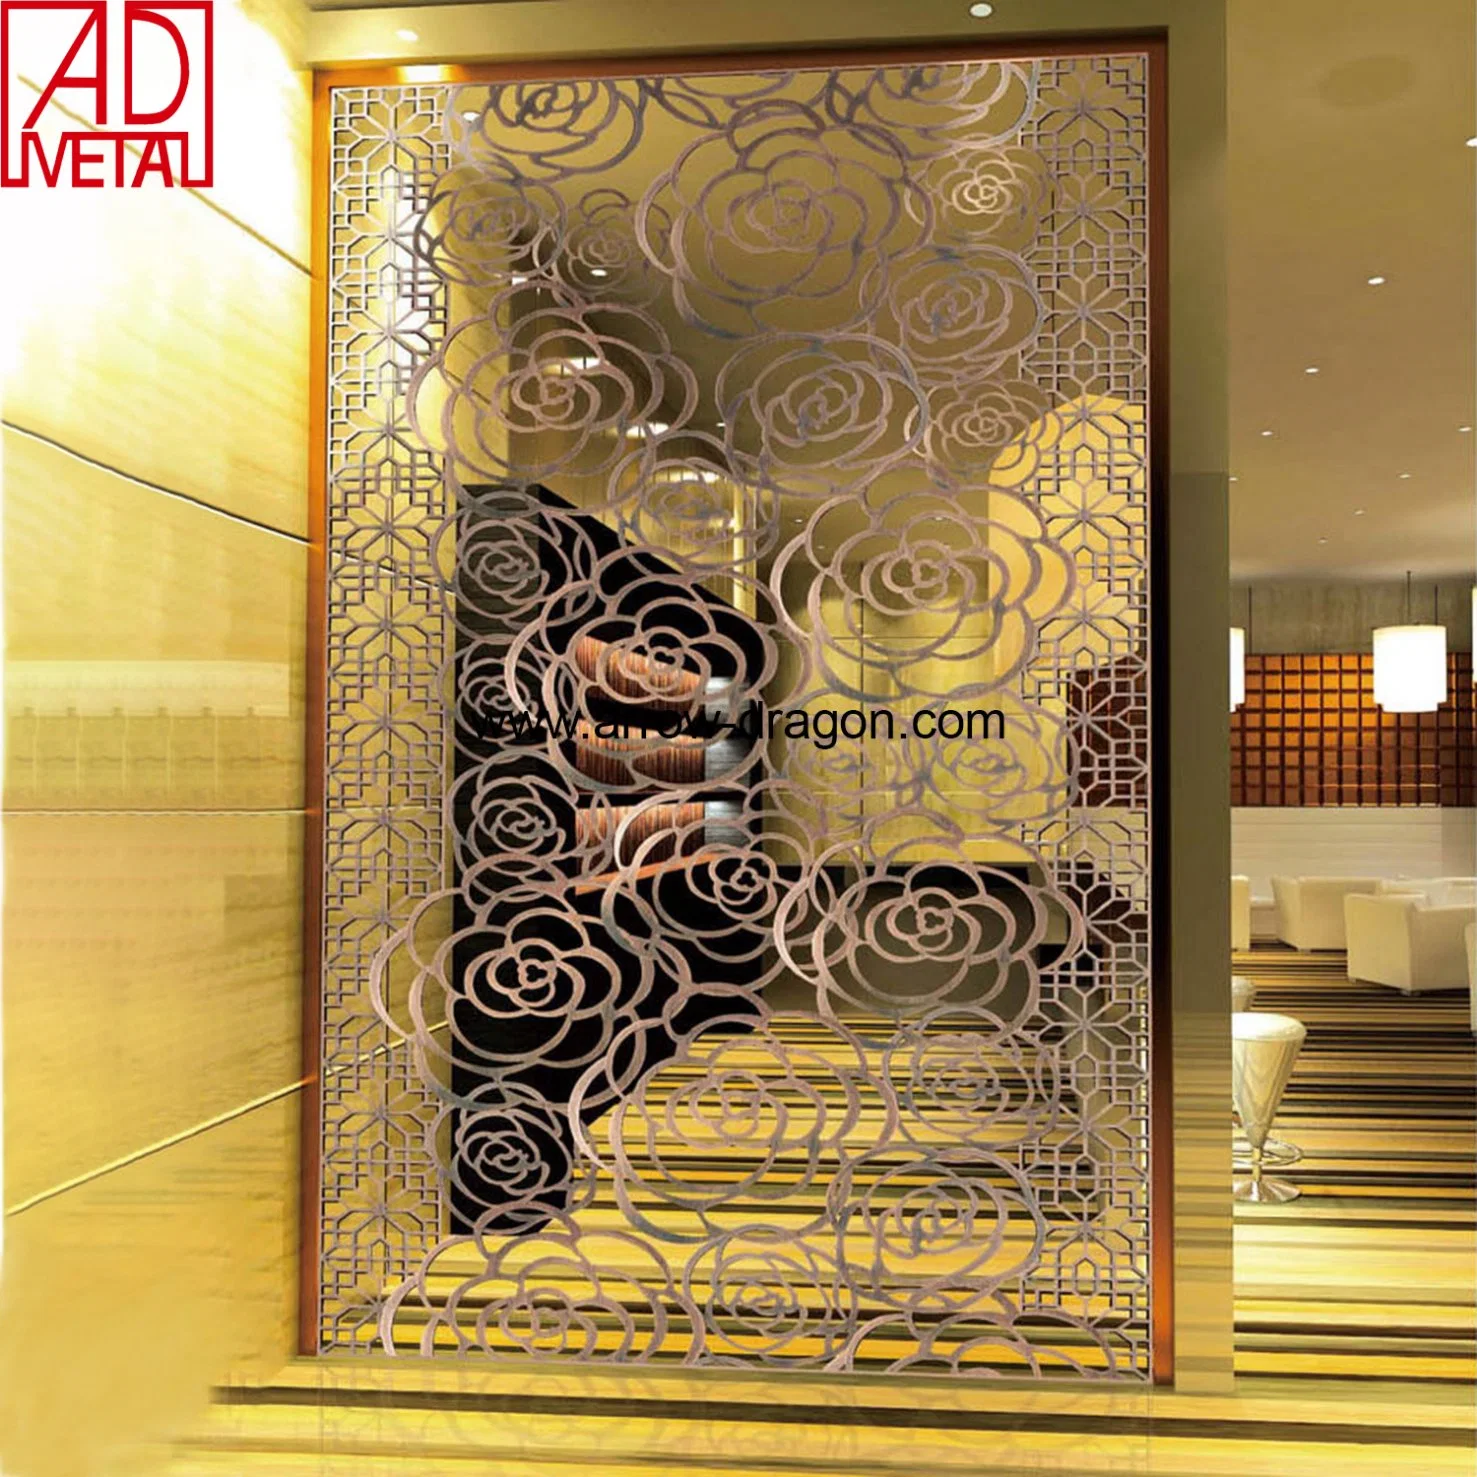 Aluminum Stainless Steel Brass Laser Cut CNC Router Wall Cladding Perforated Sheet Screen Panel for Hotel/Cafe/Office Partition Divider